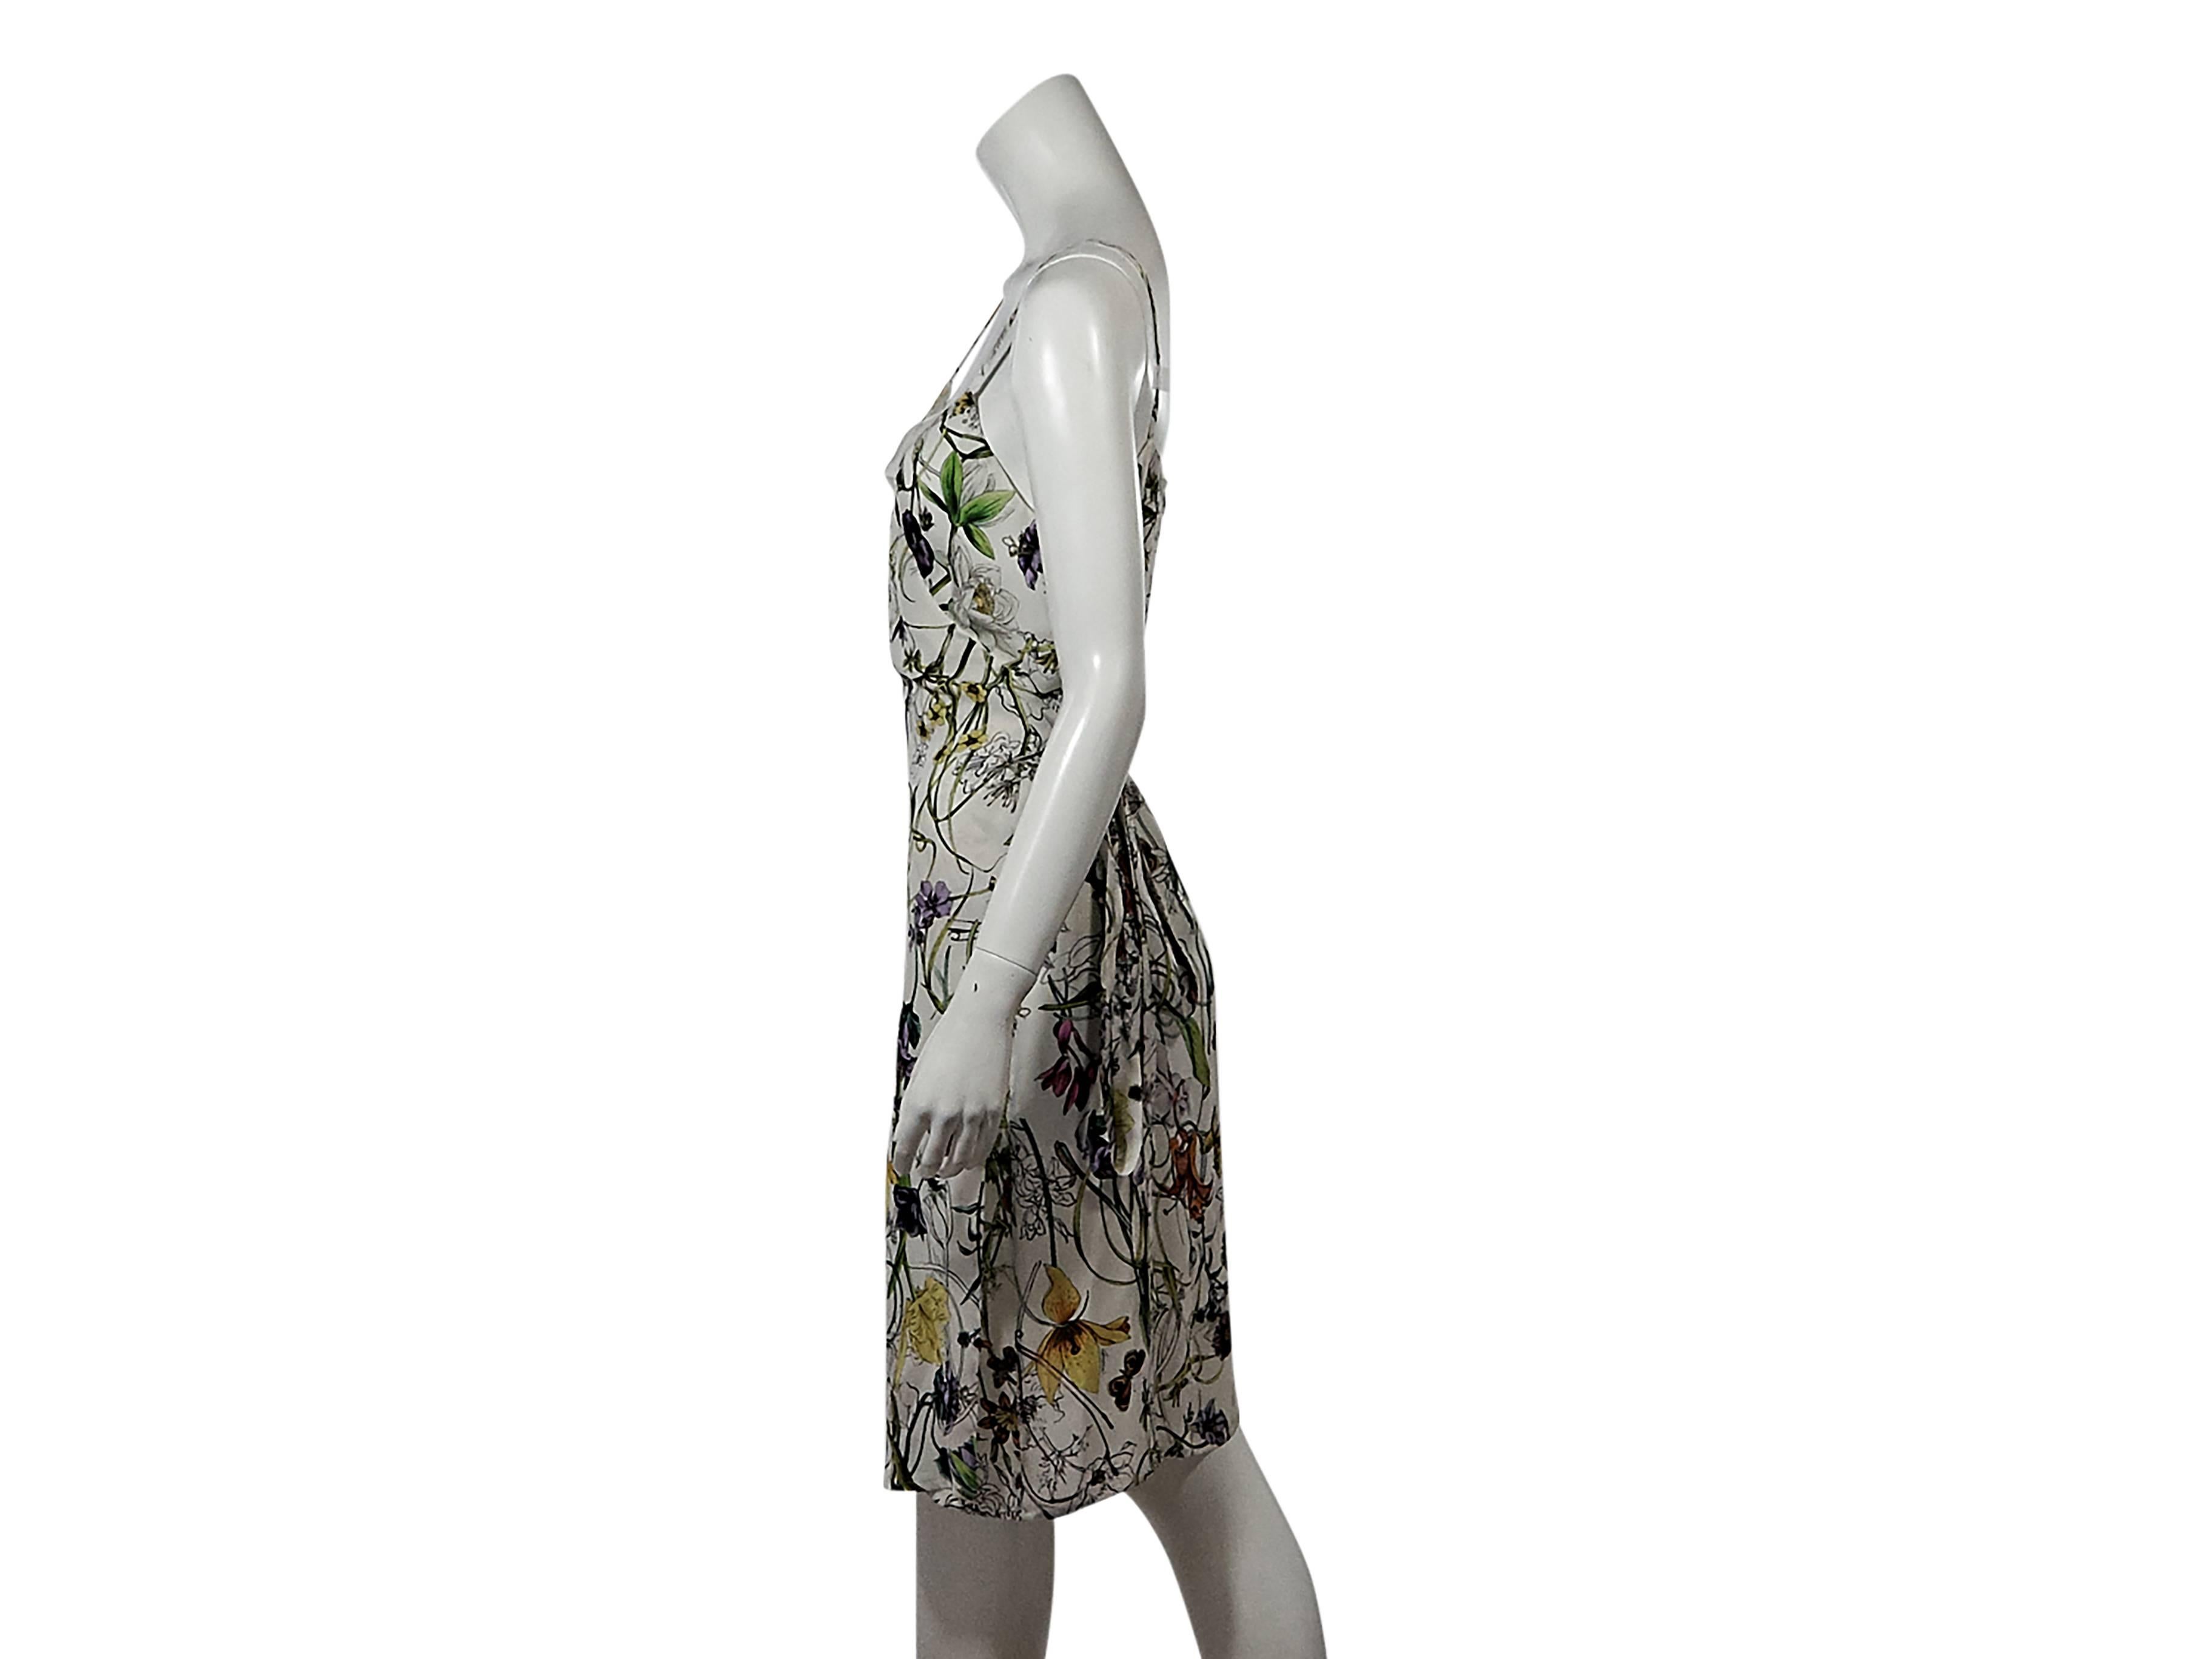 Product details:  Multicolor floral-print wrap dress by Gucci.  Sleeveless.  Adjustable tie waist closure.  Size 8
Condition: Pre-owned. New with tags.

Est. Retail $ 5,500.00
